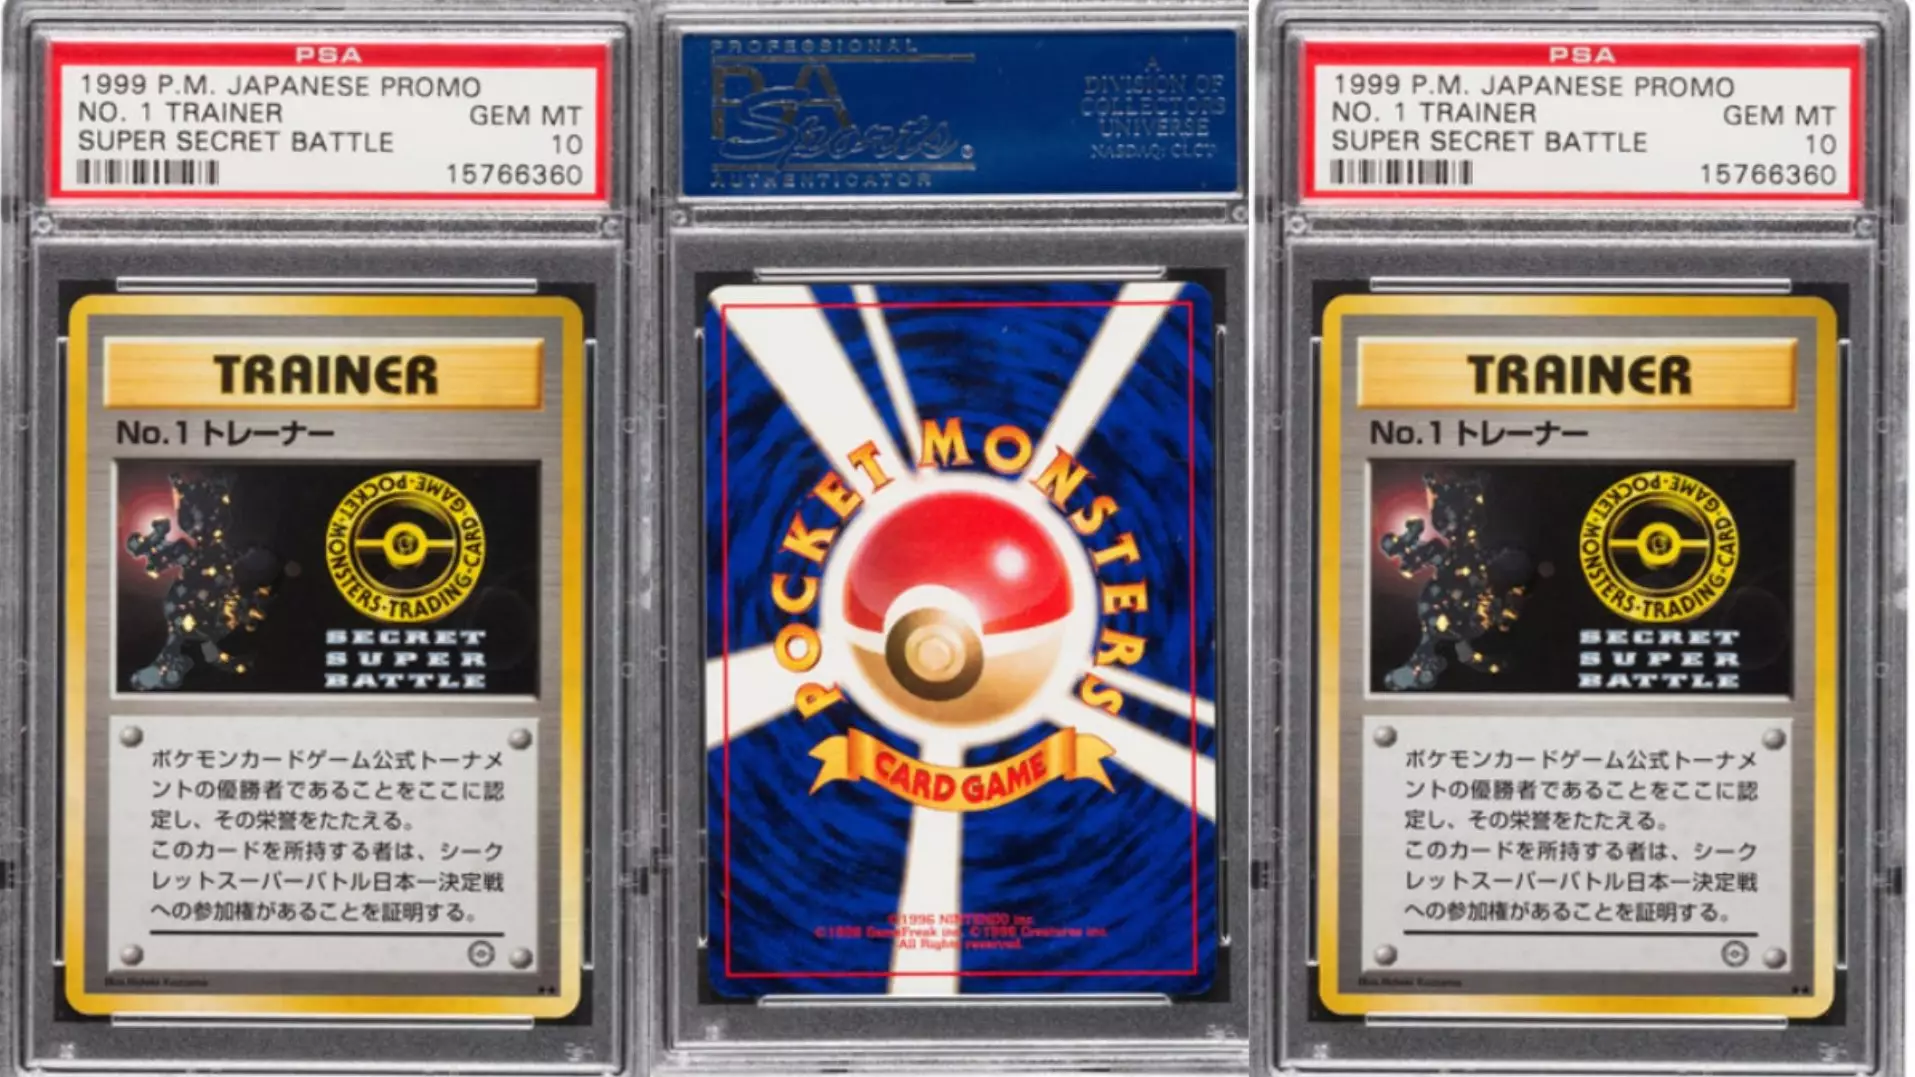 'Holy Grail' Of Pokémon Cards Expected To Go For £88,000 At Auction